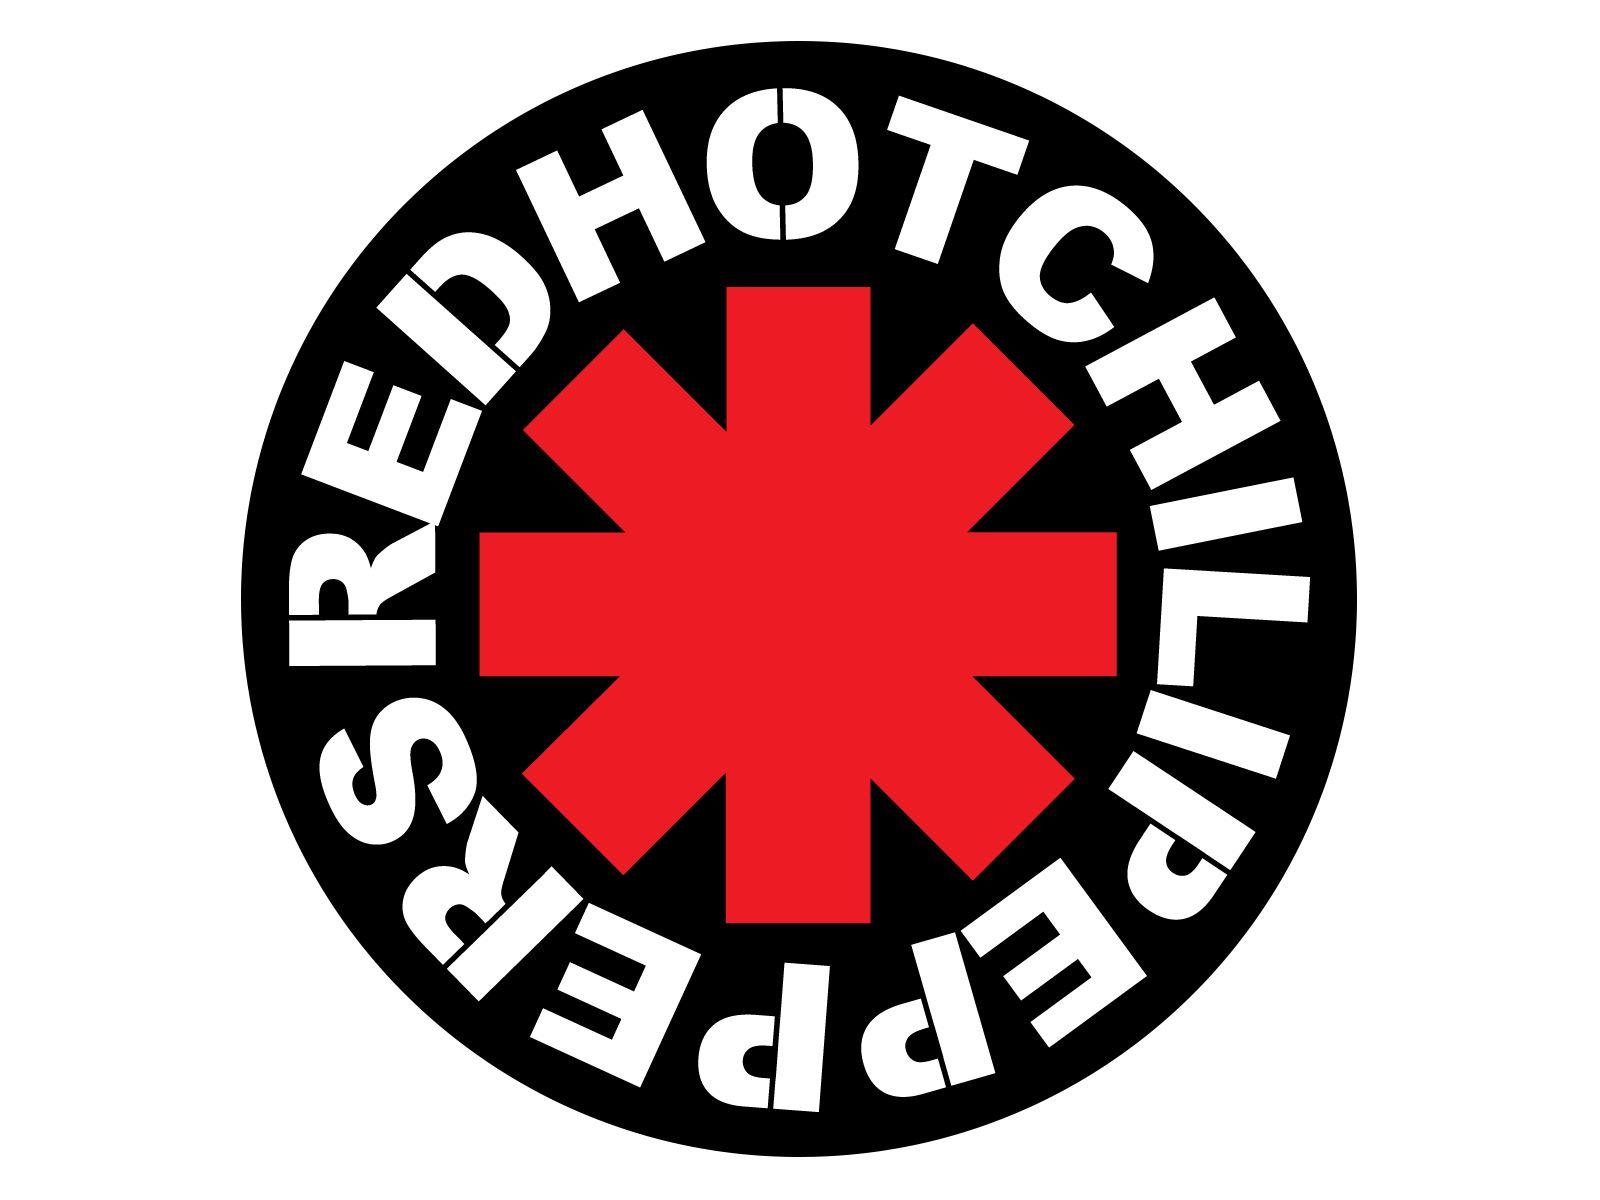 Red Hot Chili Peppers Logo - Red Hot Chili Peppers Logo, Red Hot Chili Peppers Symbol, Meaning ...